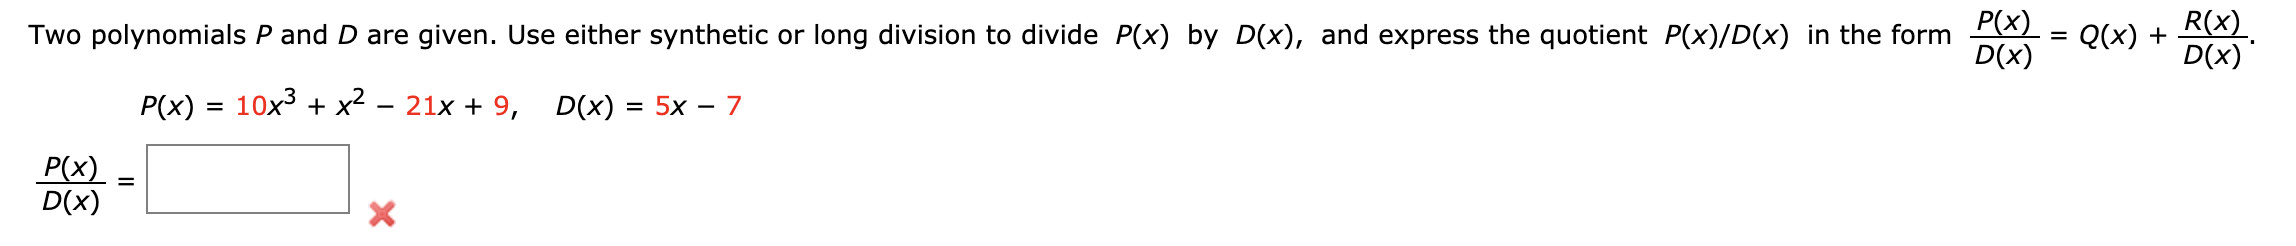 R(x)
D(x)
Two polynomials P and D are given. Use either synthetic or long division to divide P(x) by D(x), and express the quotient P(x)/D(x) in the form
D(x)
Q(x)
=
21x9,
P(x) 10x3 x2
D(x)
= 5x - 7
Р(x)
D(x)
